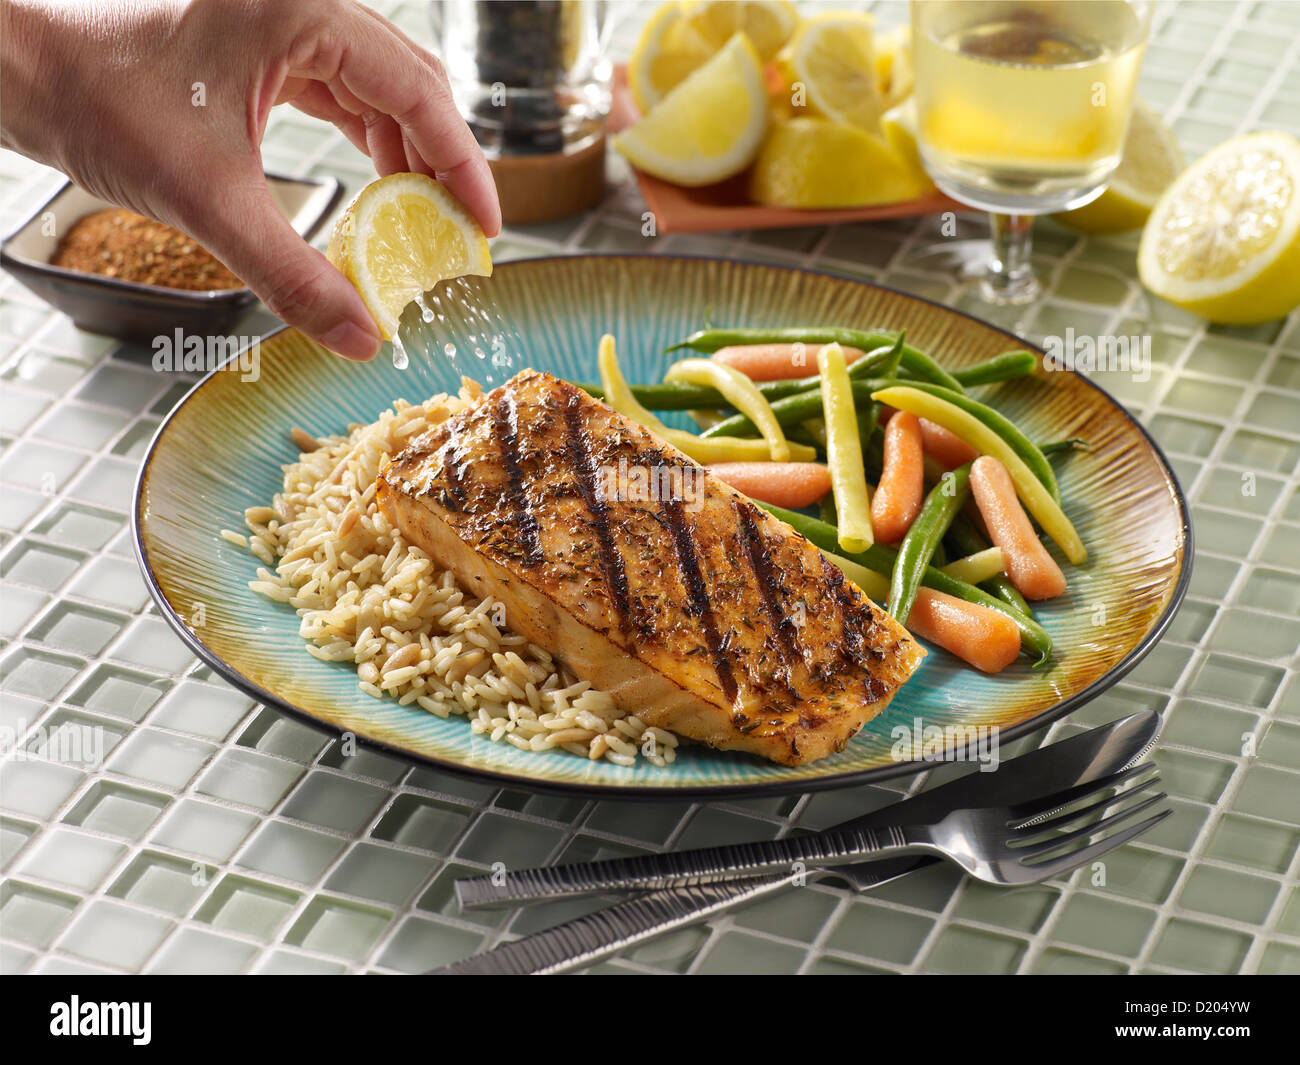 Blackened salmon with lemon squeeze over rice with vegetables Stock Photo